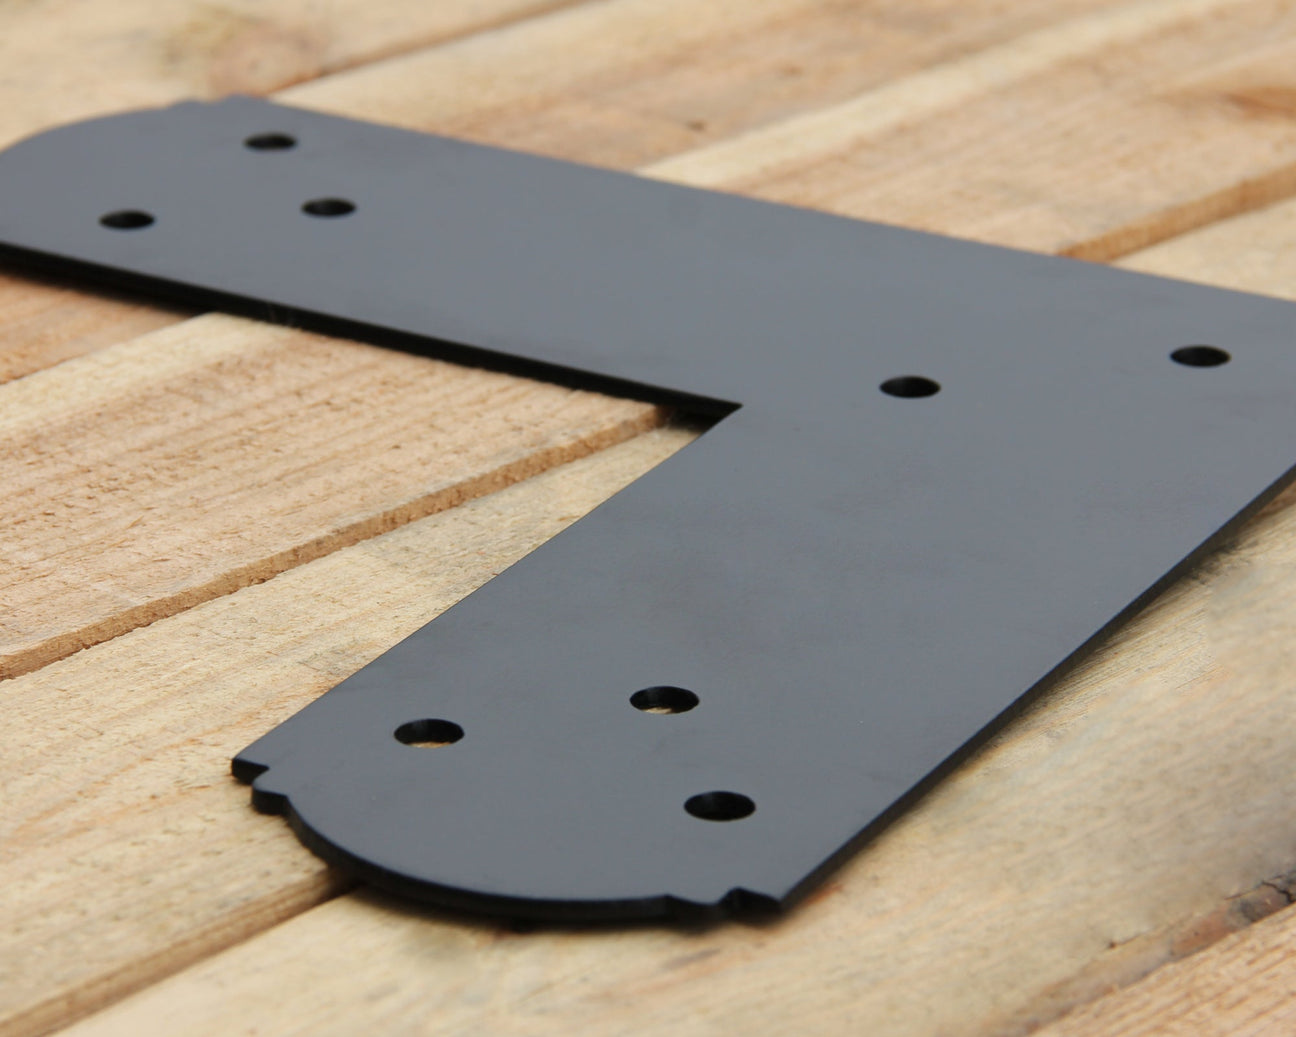 Decorative Metal bracket for 4x4 dimensional post and beams, mainly for decorative purposes